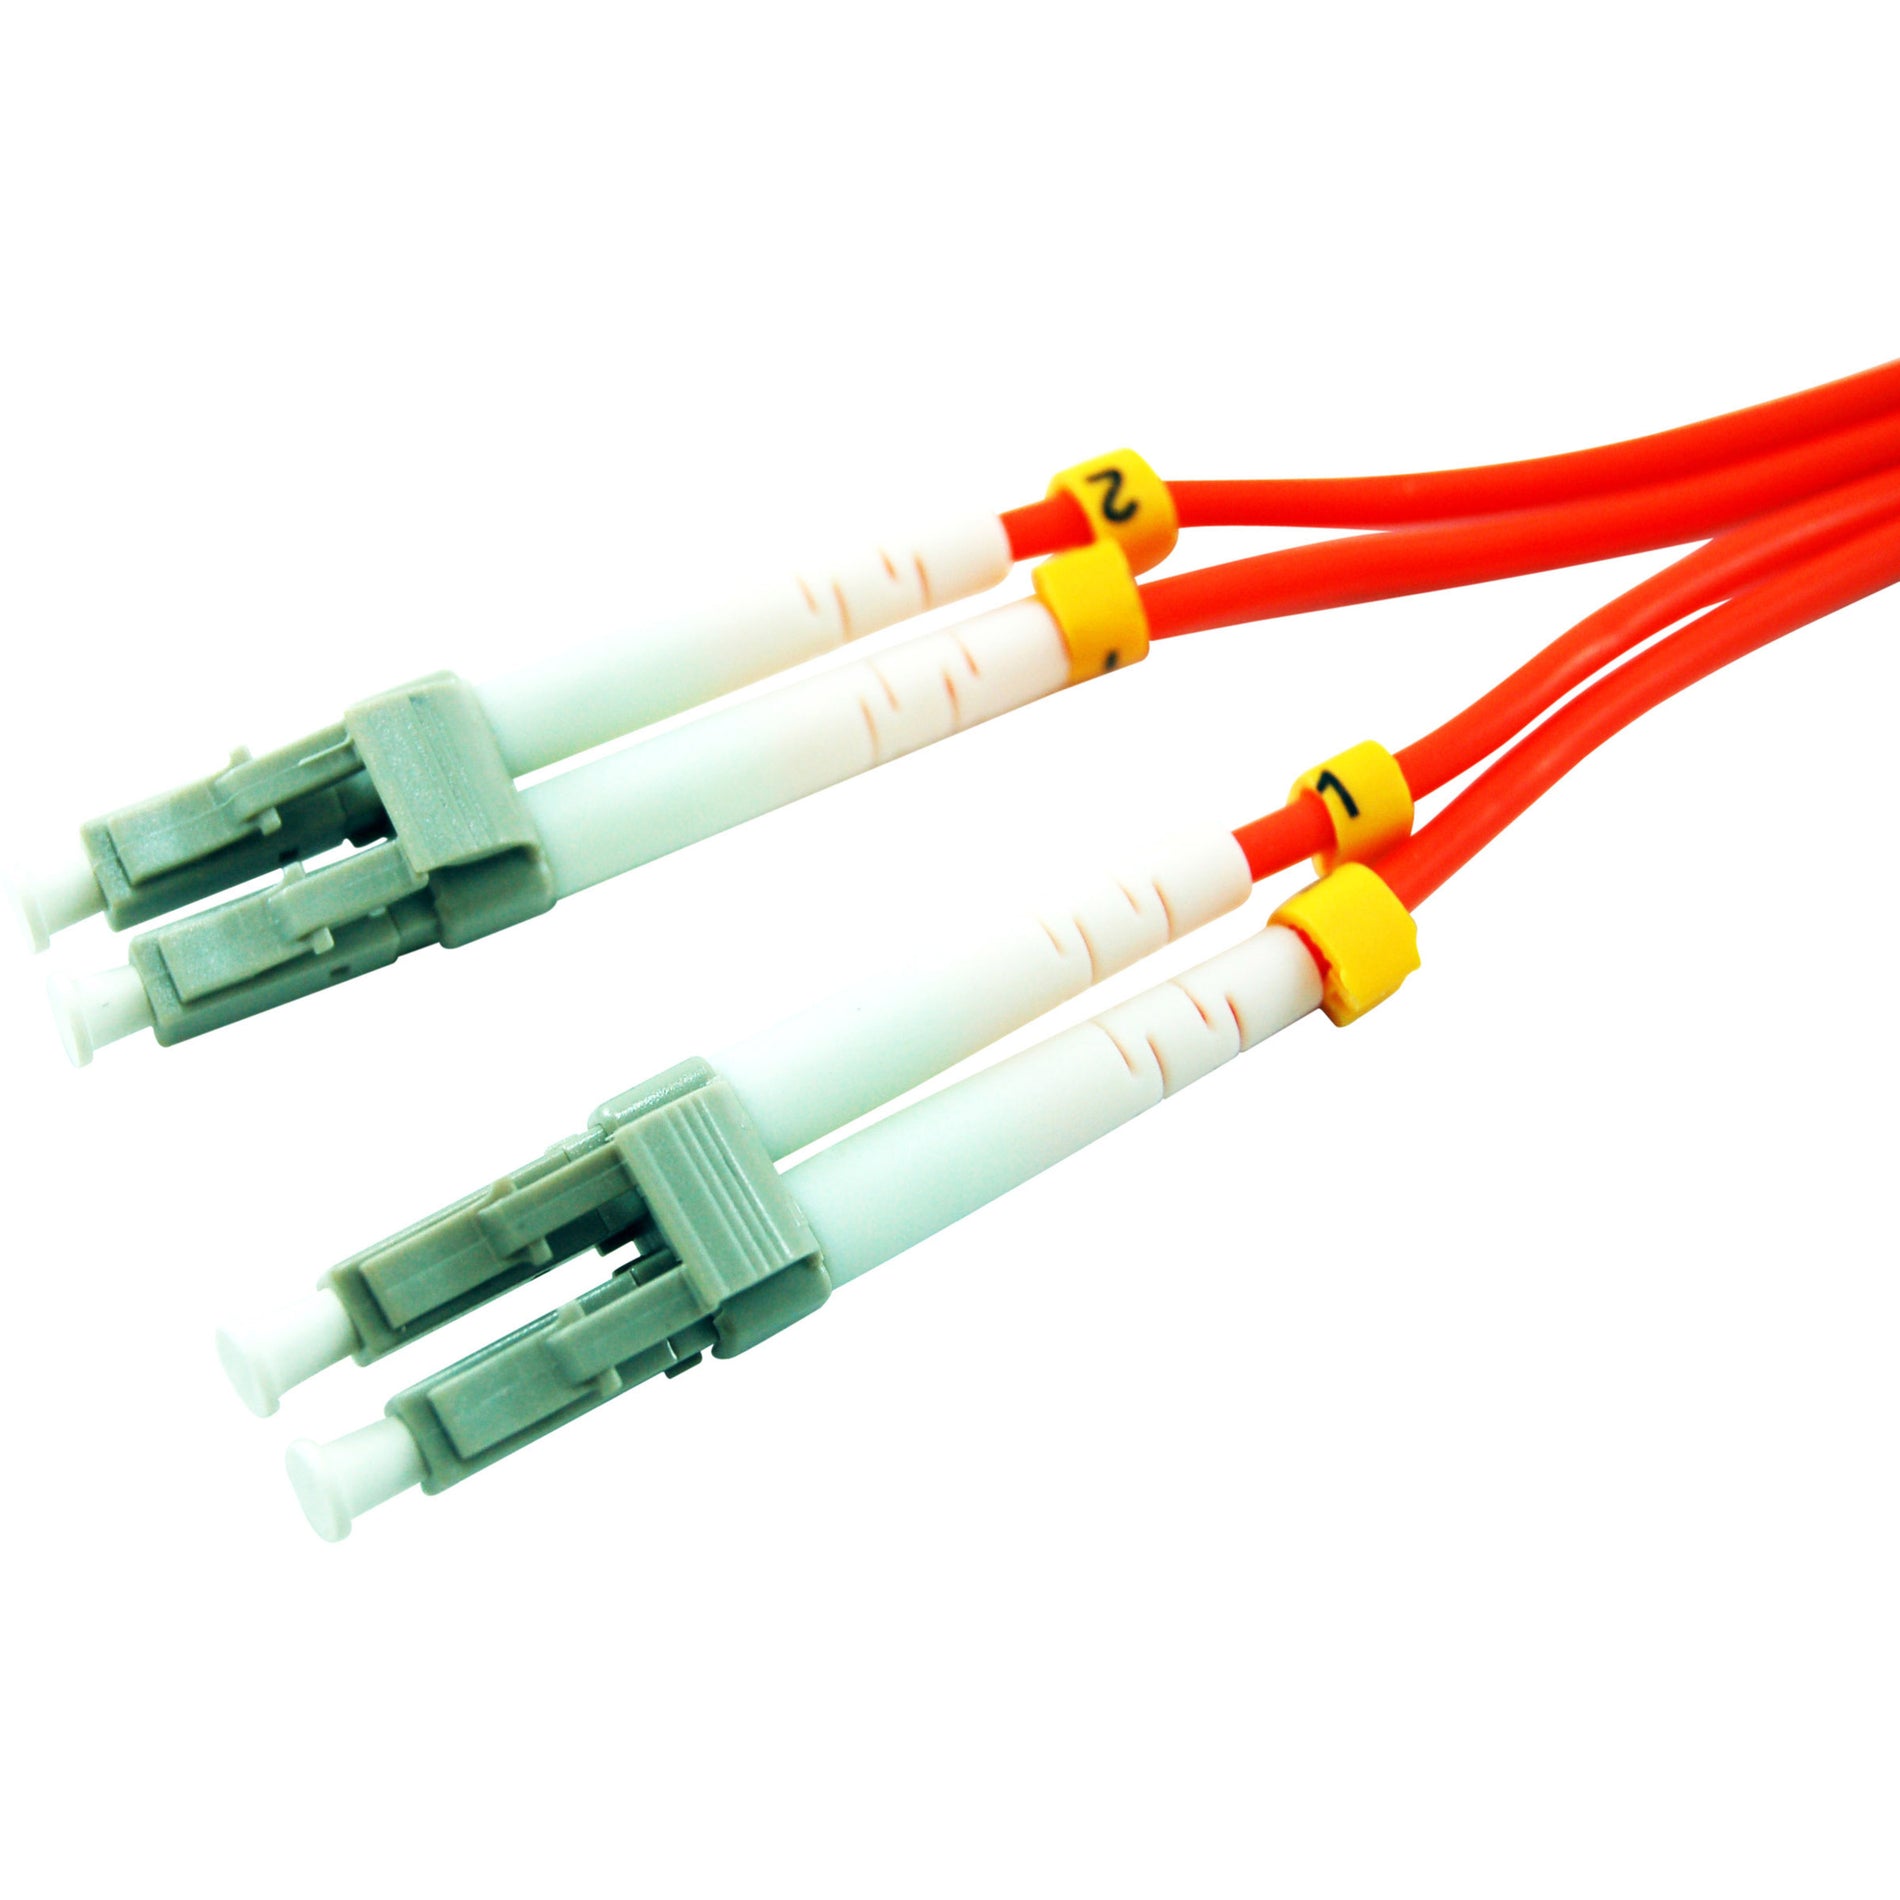 Comprehensive LC-LC-MM-1M 1M LC Multimode 3.0mm Duplex Network Cable, Riser Rated, 1 Gbit/s Data Transfer Rate